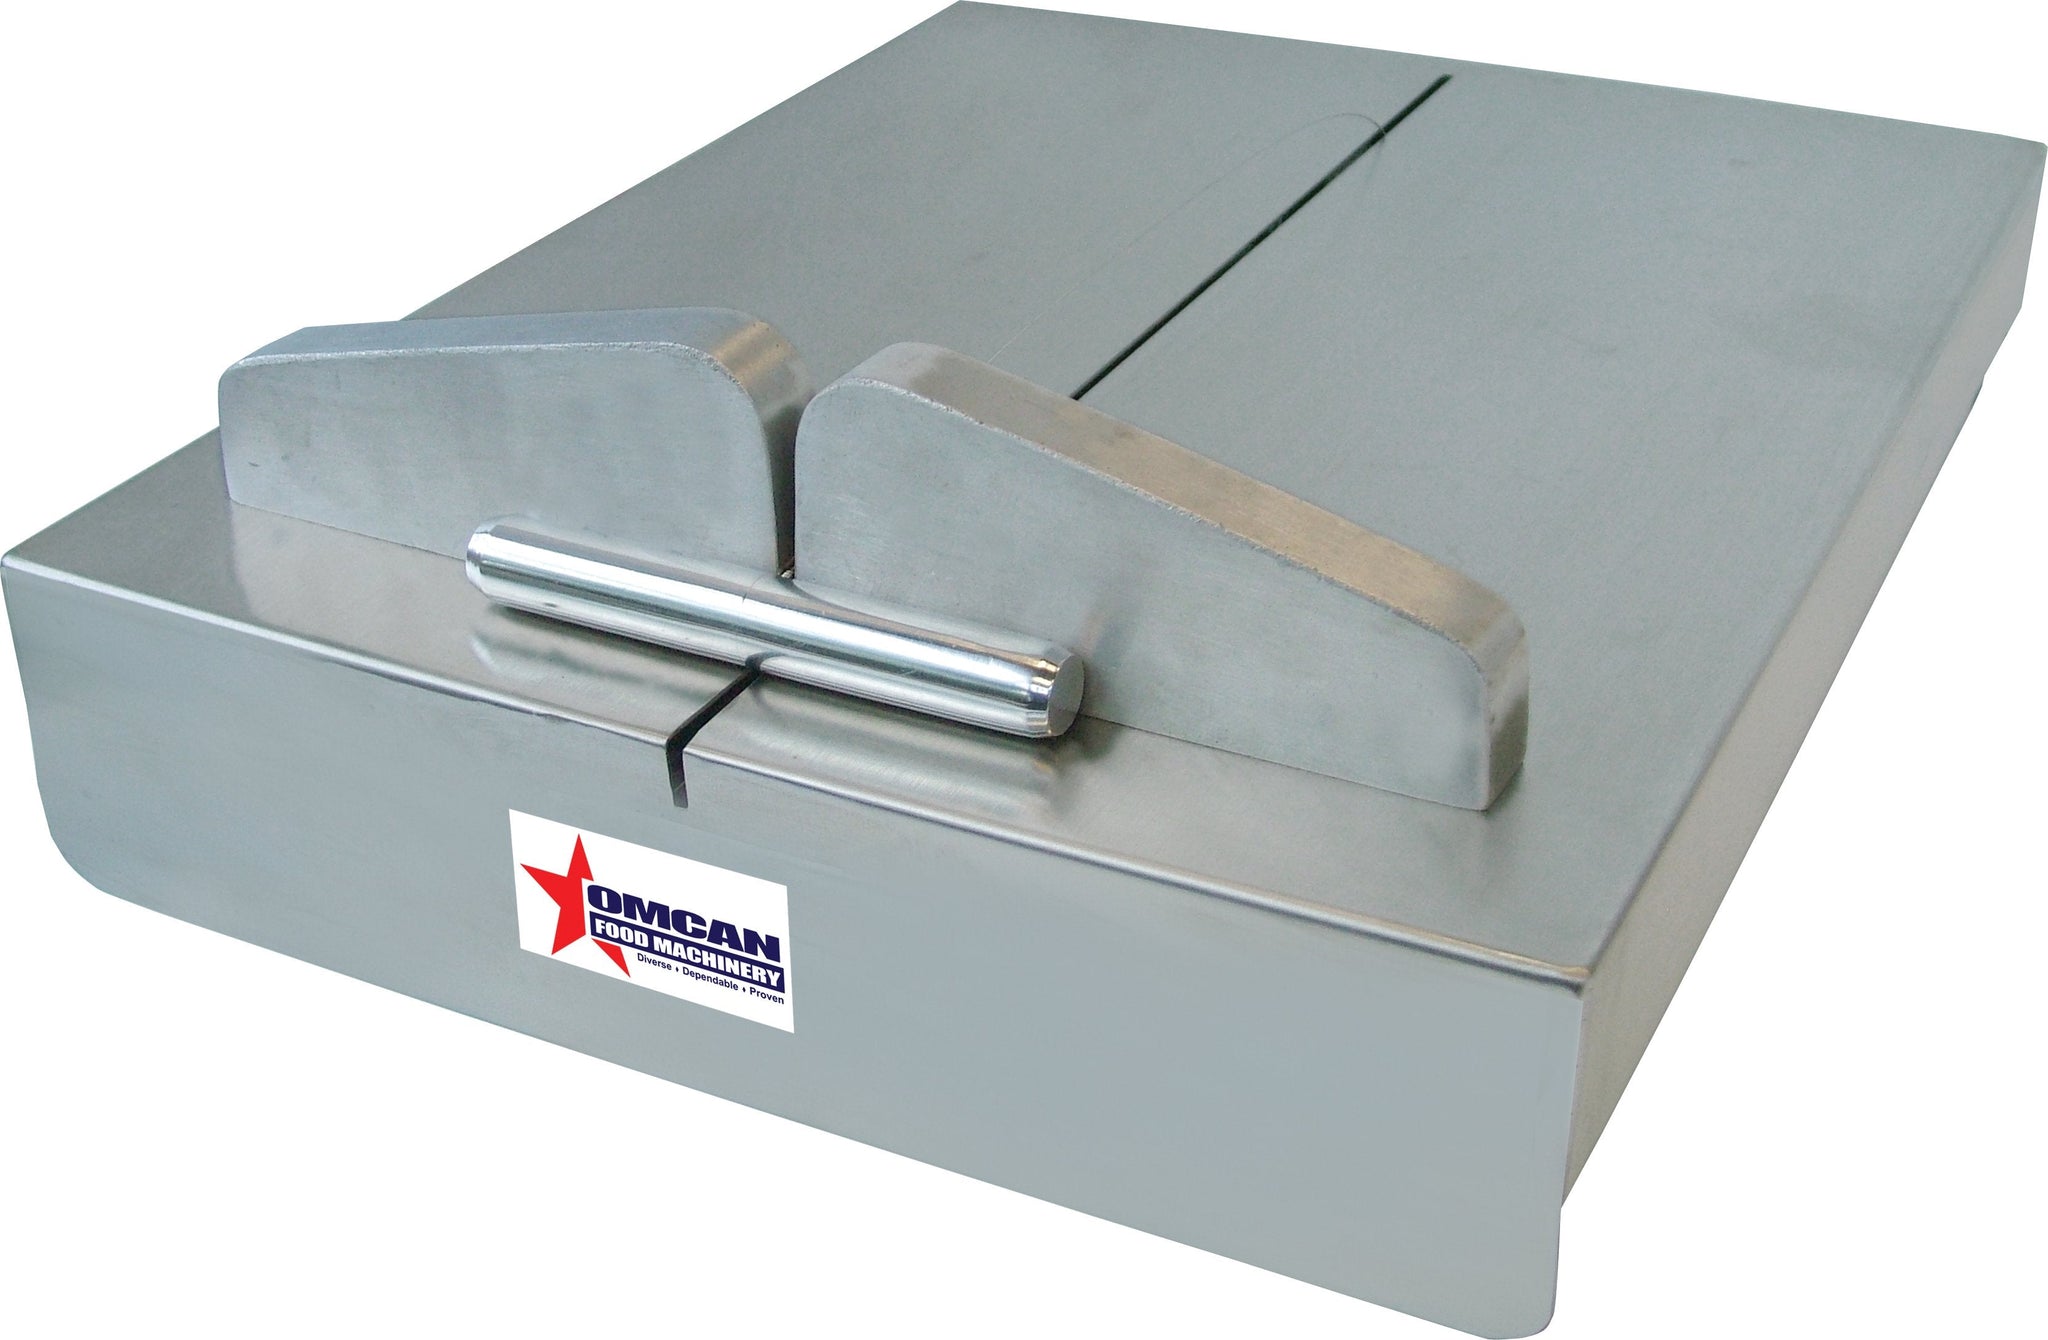 Omcan - Stainless Steel Cheese Cutter - 11400